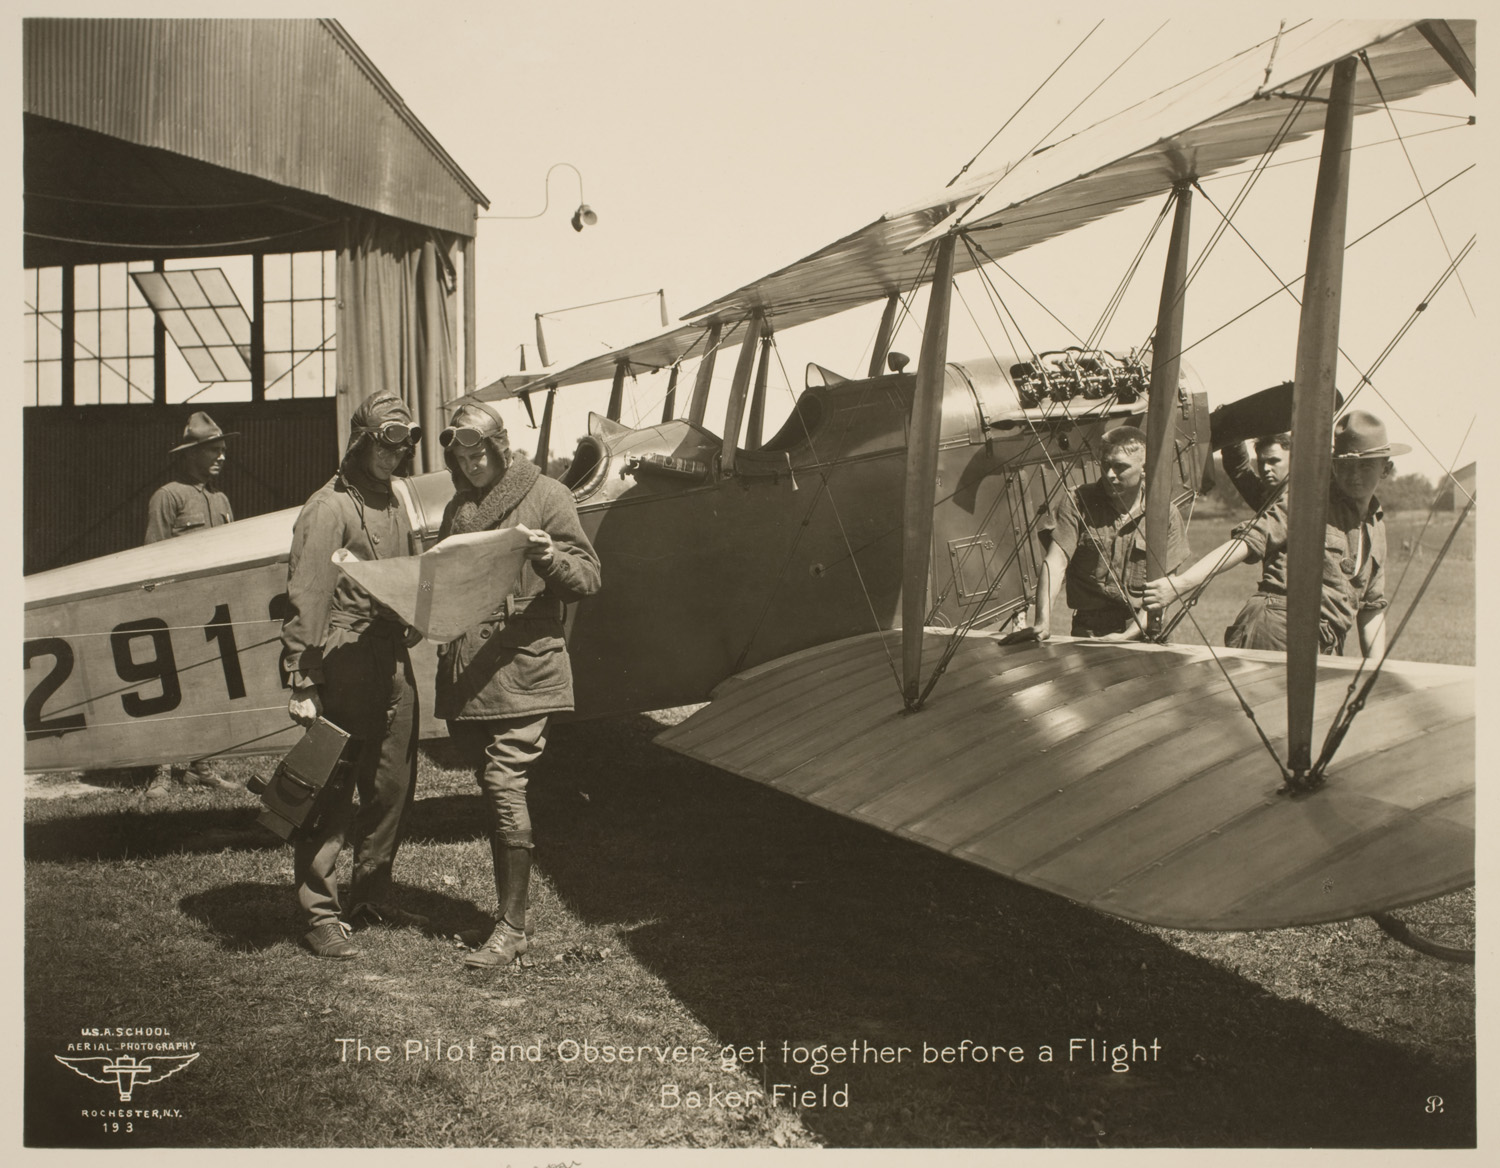 The Pilot and Observer Get Together Before a Flight, Baker Field, 1918
                              
                              
                              George Eastman House Collection, Gift of Dwight R. Furness